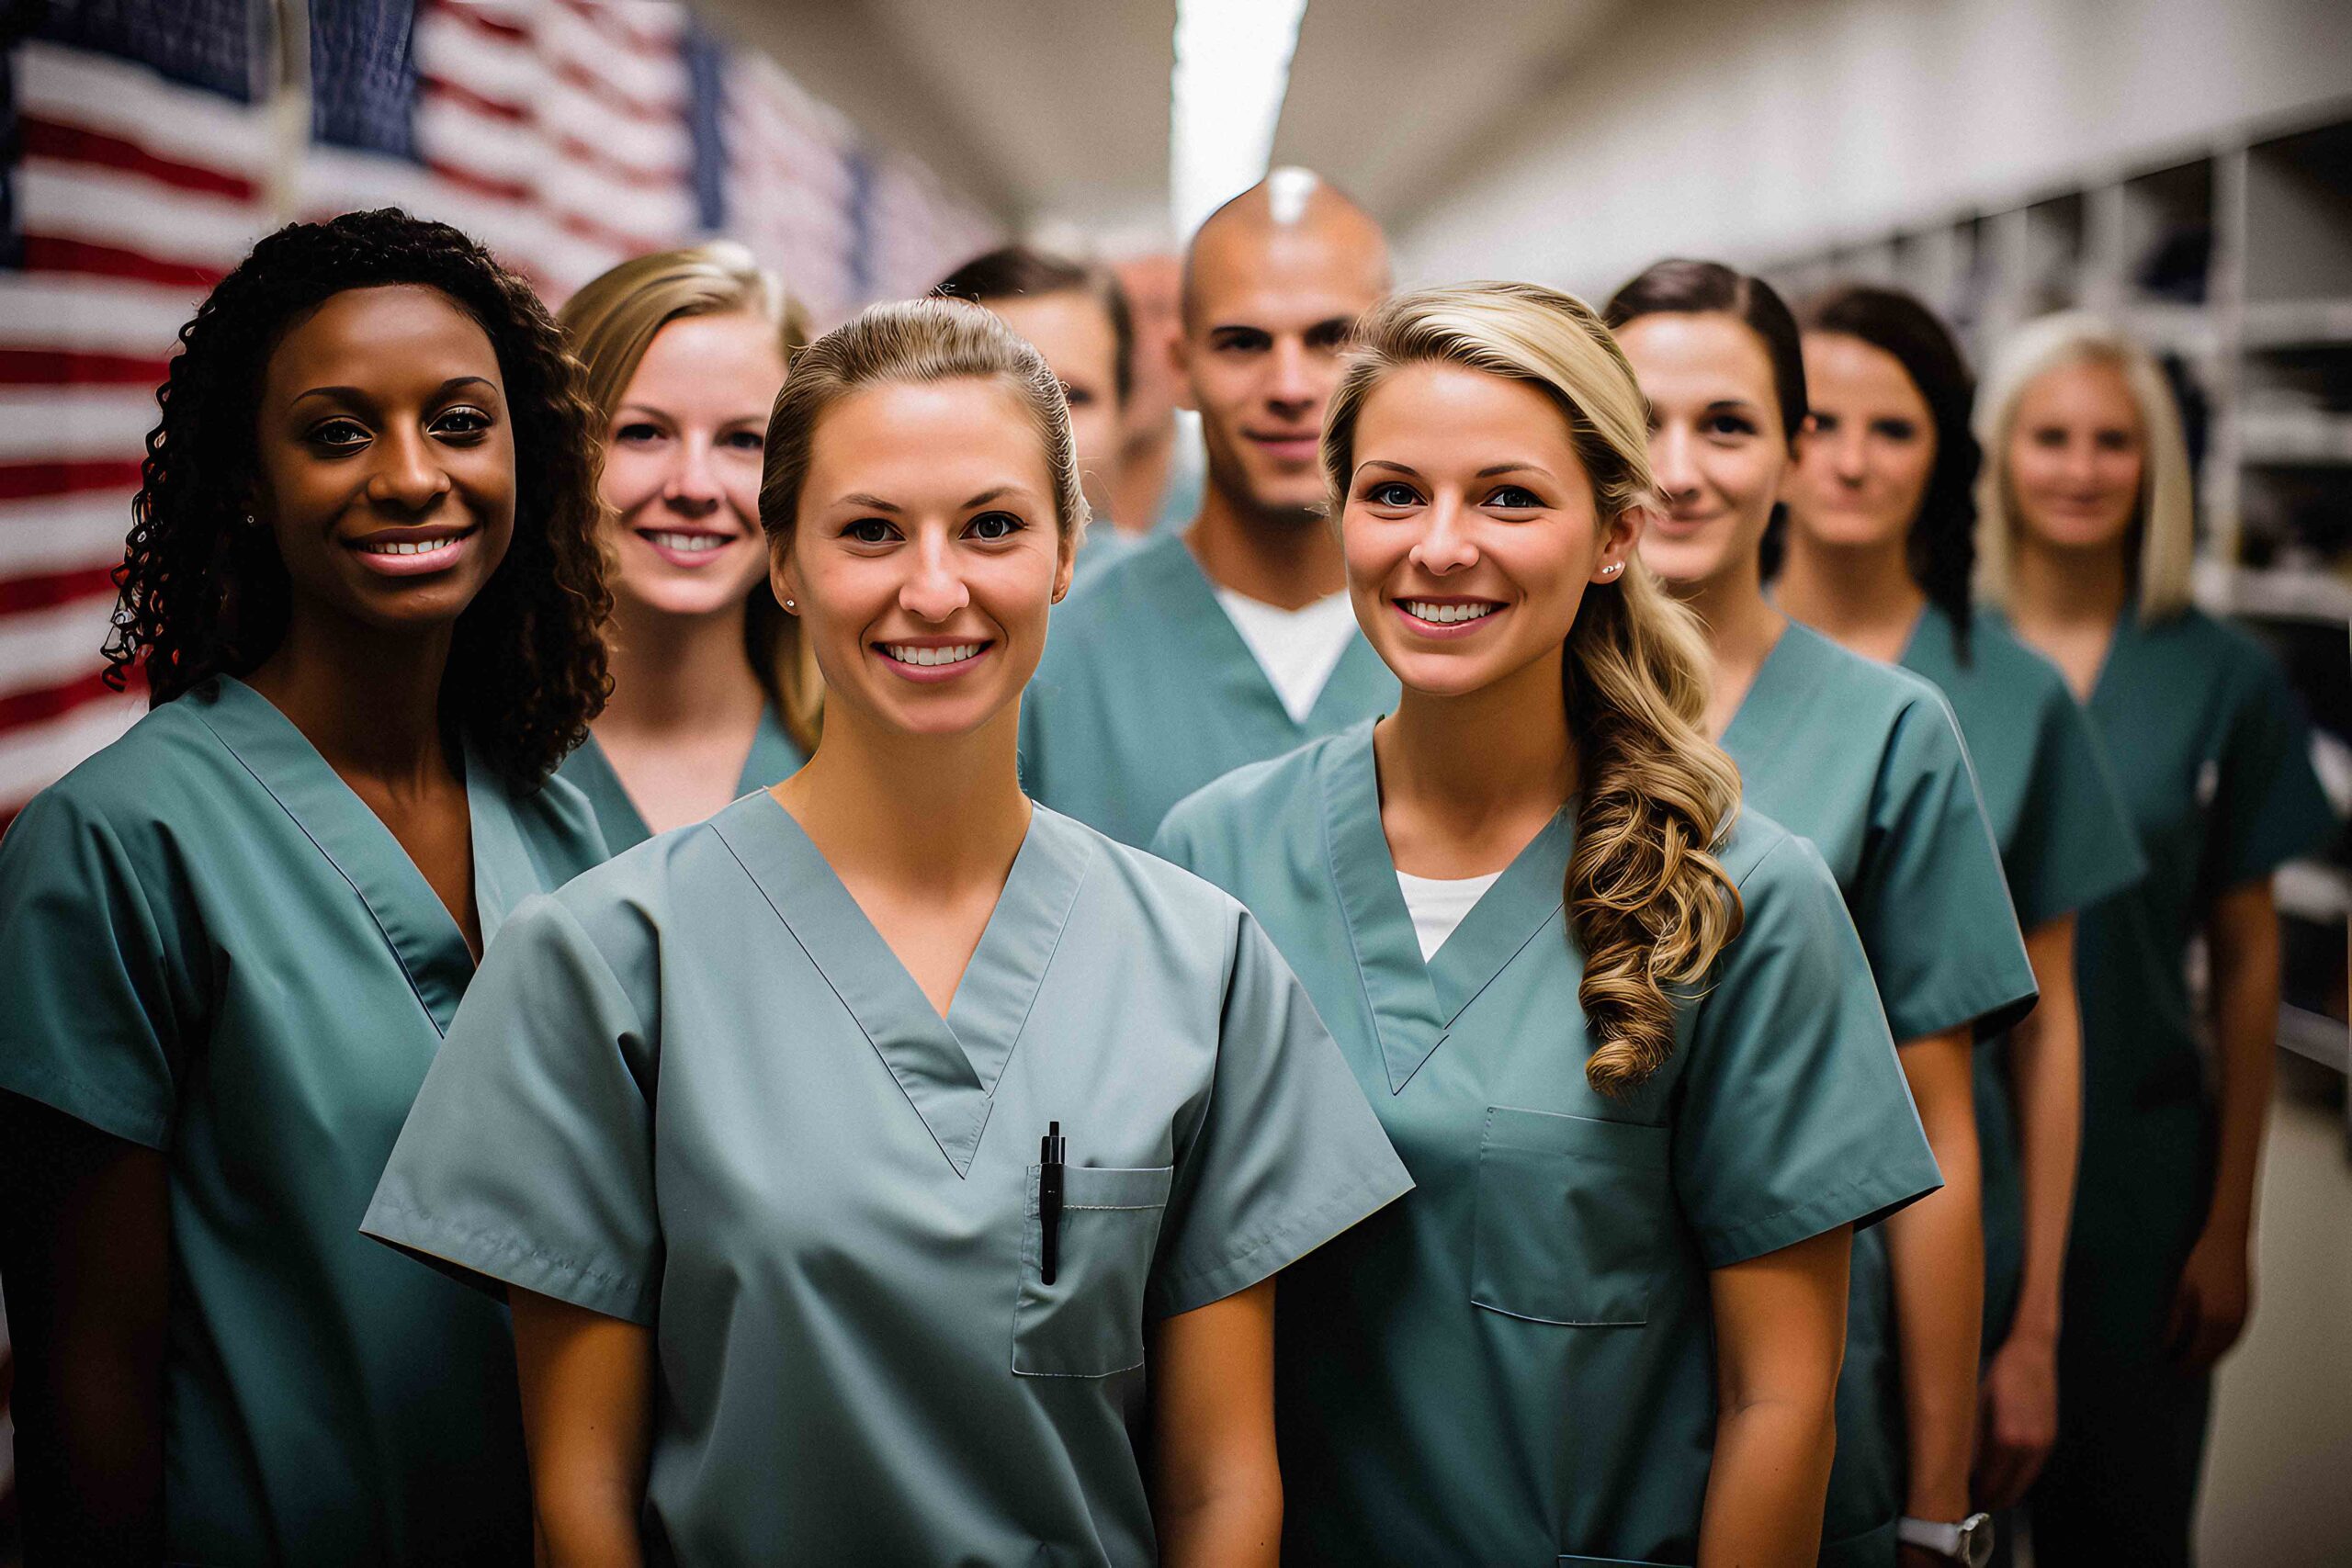 Diverse team of healthcare professionals smiling in a hospital setting